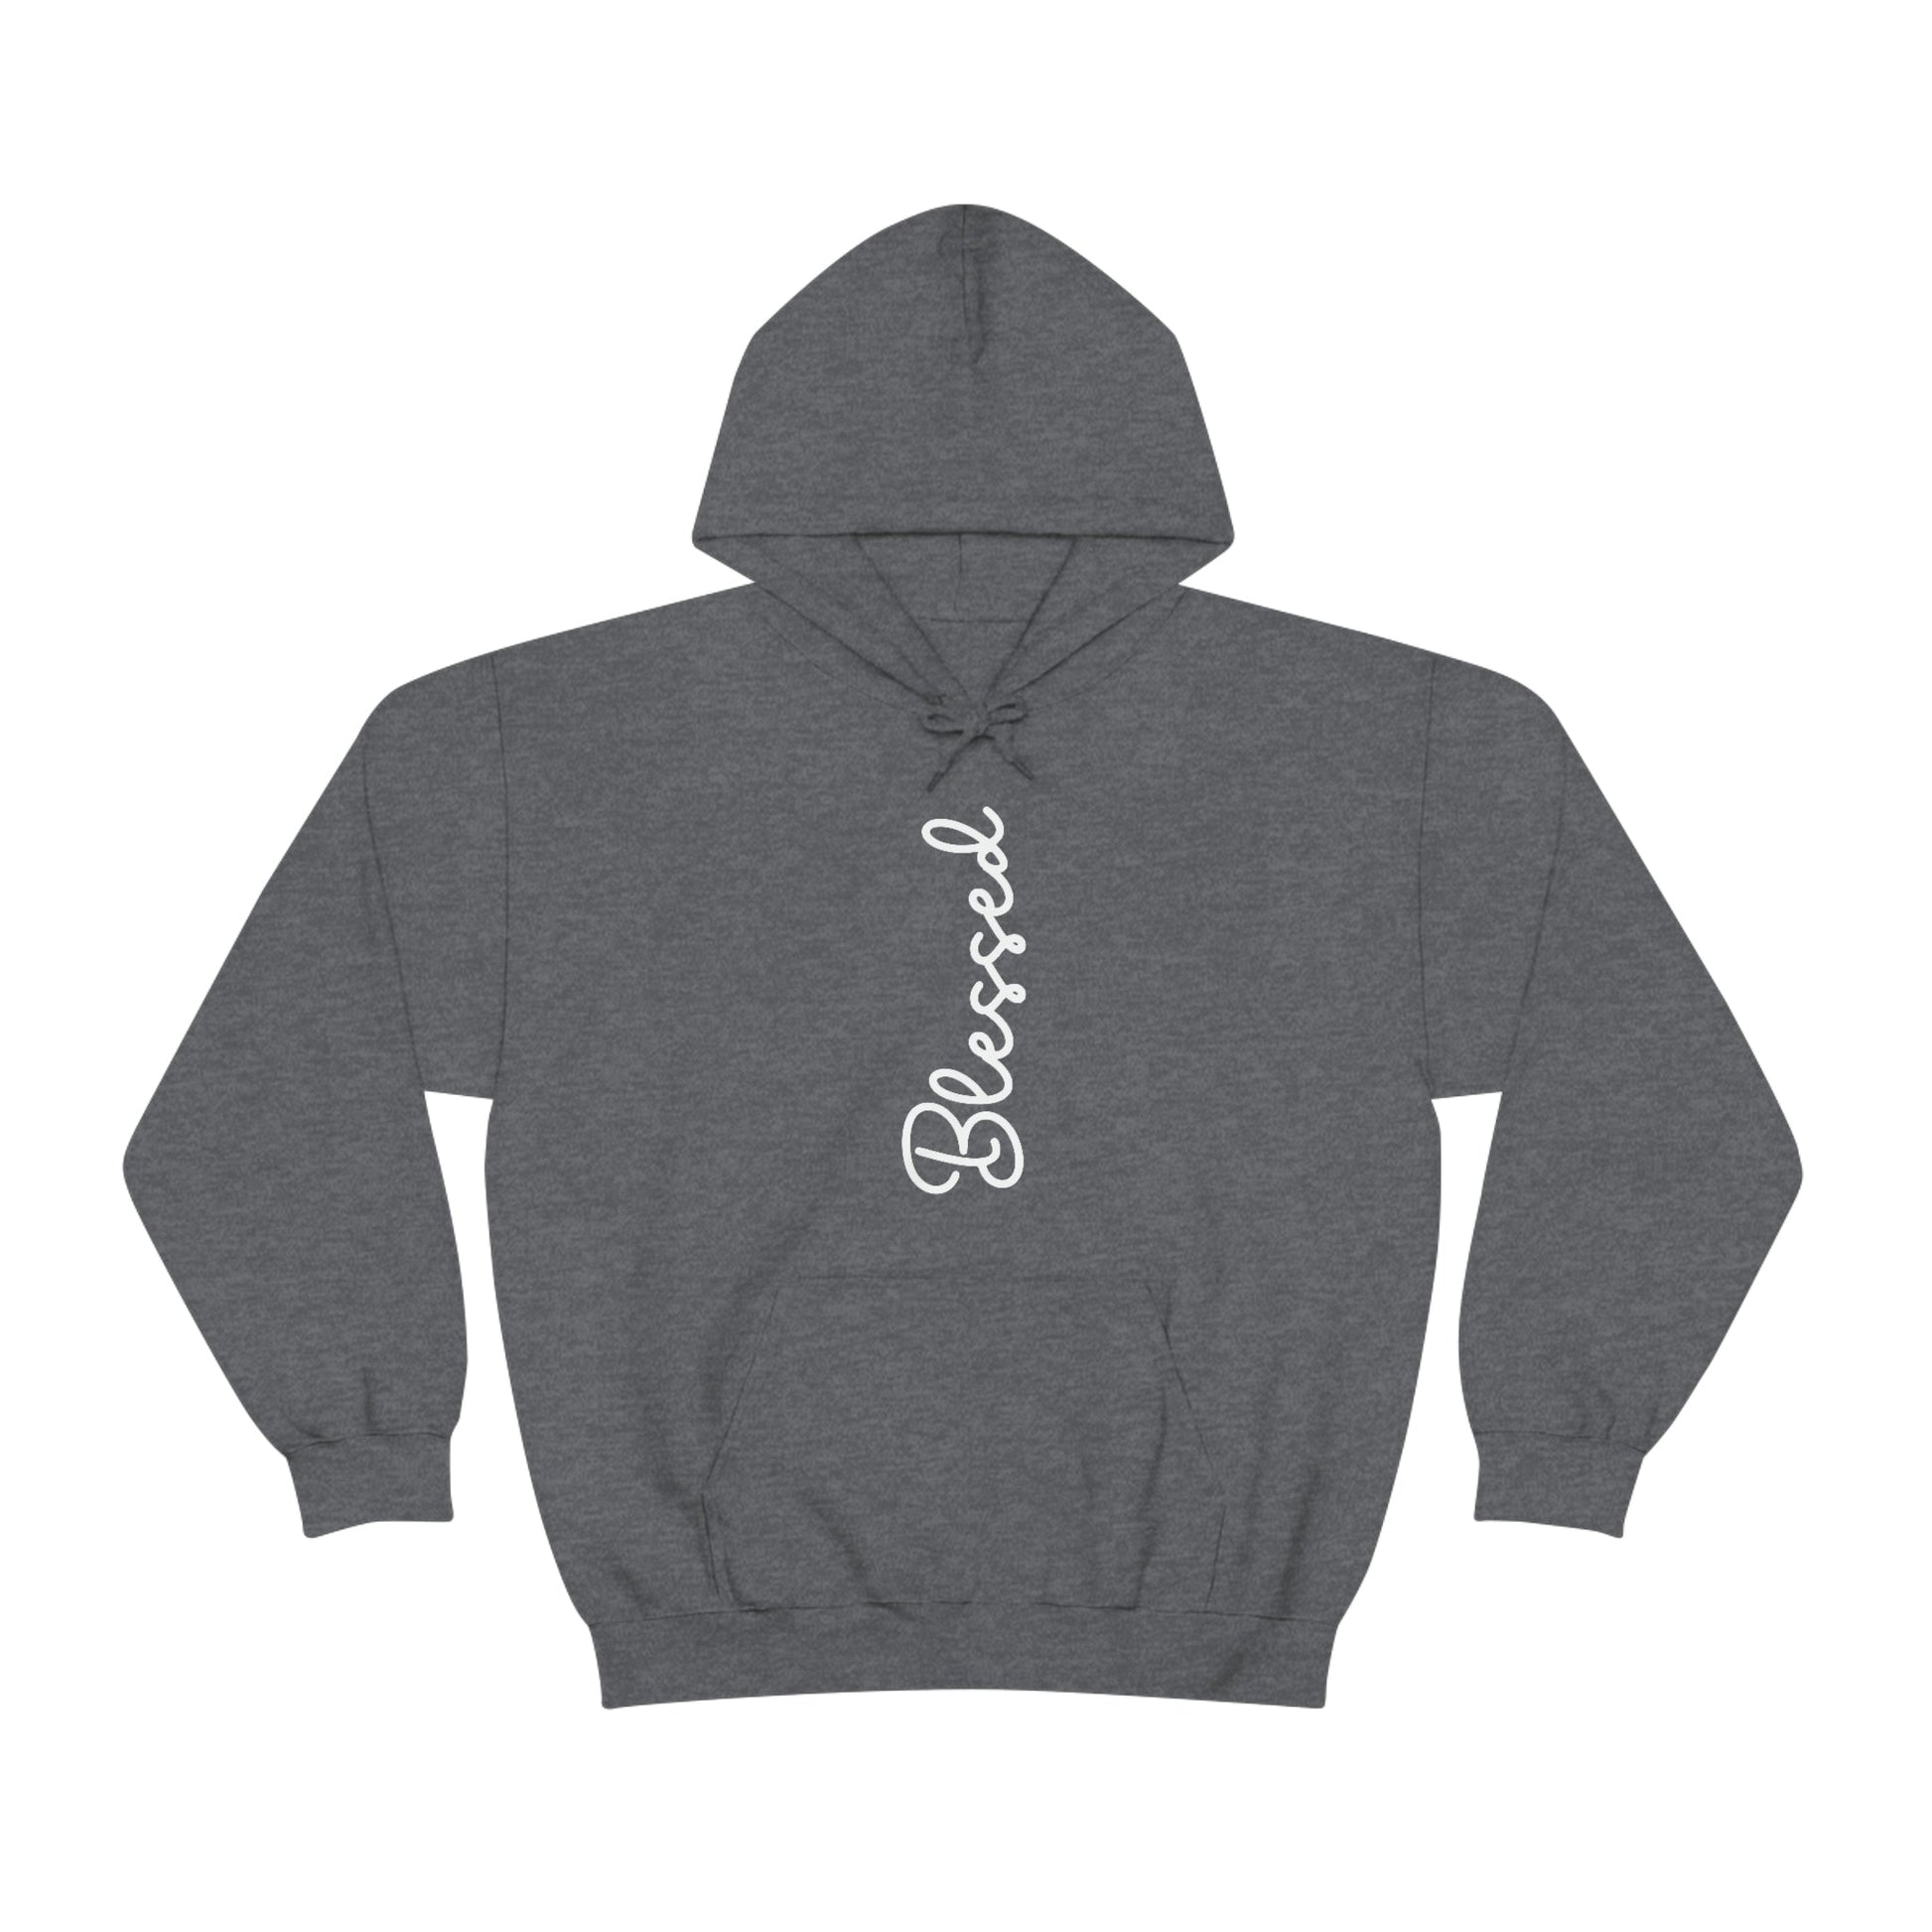 blessed hoodie, faith-based clothing, Christian apparel, inspirational clothing